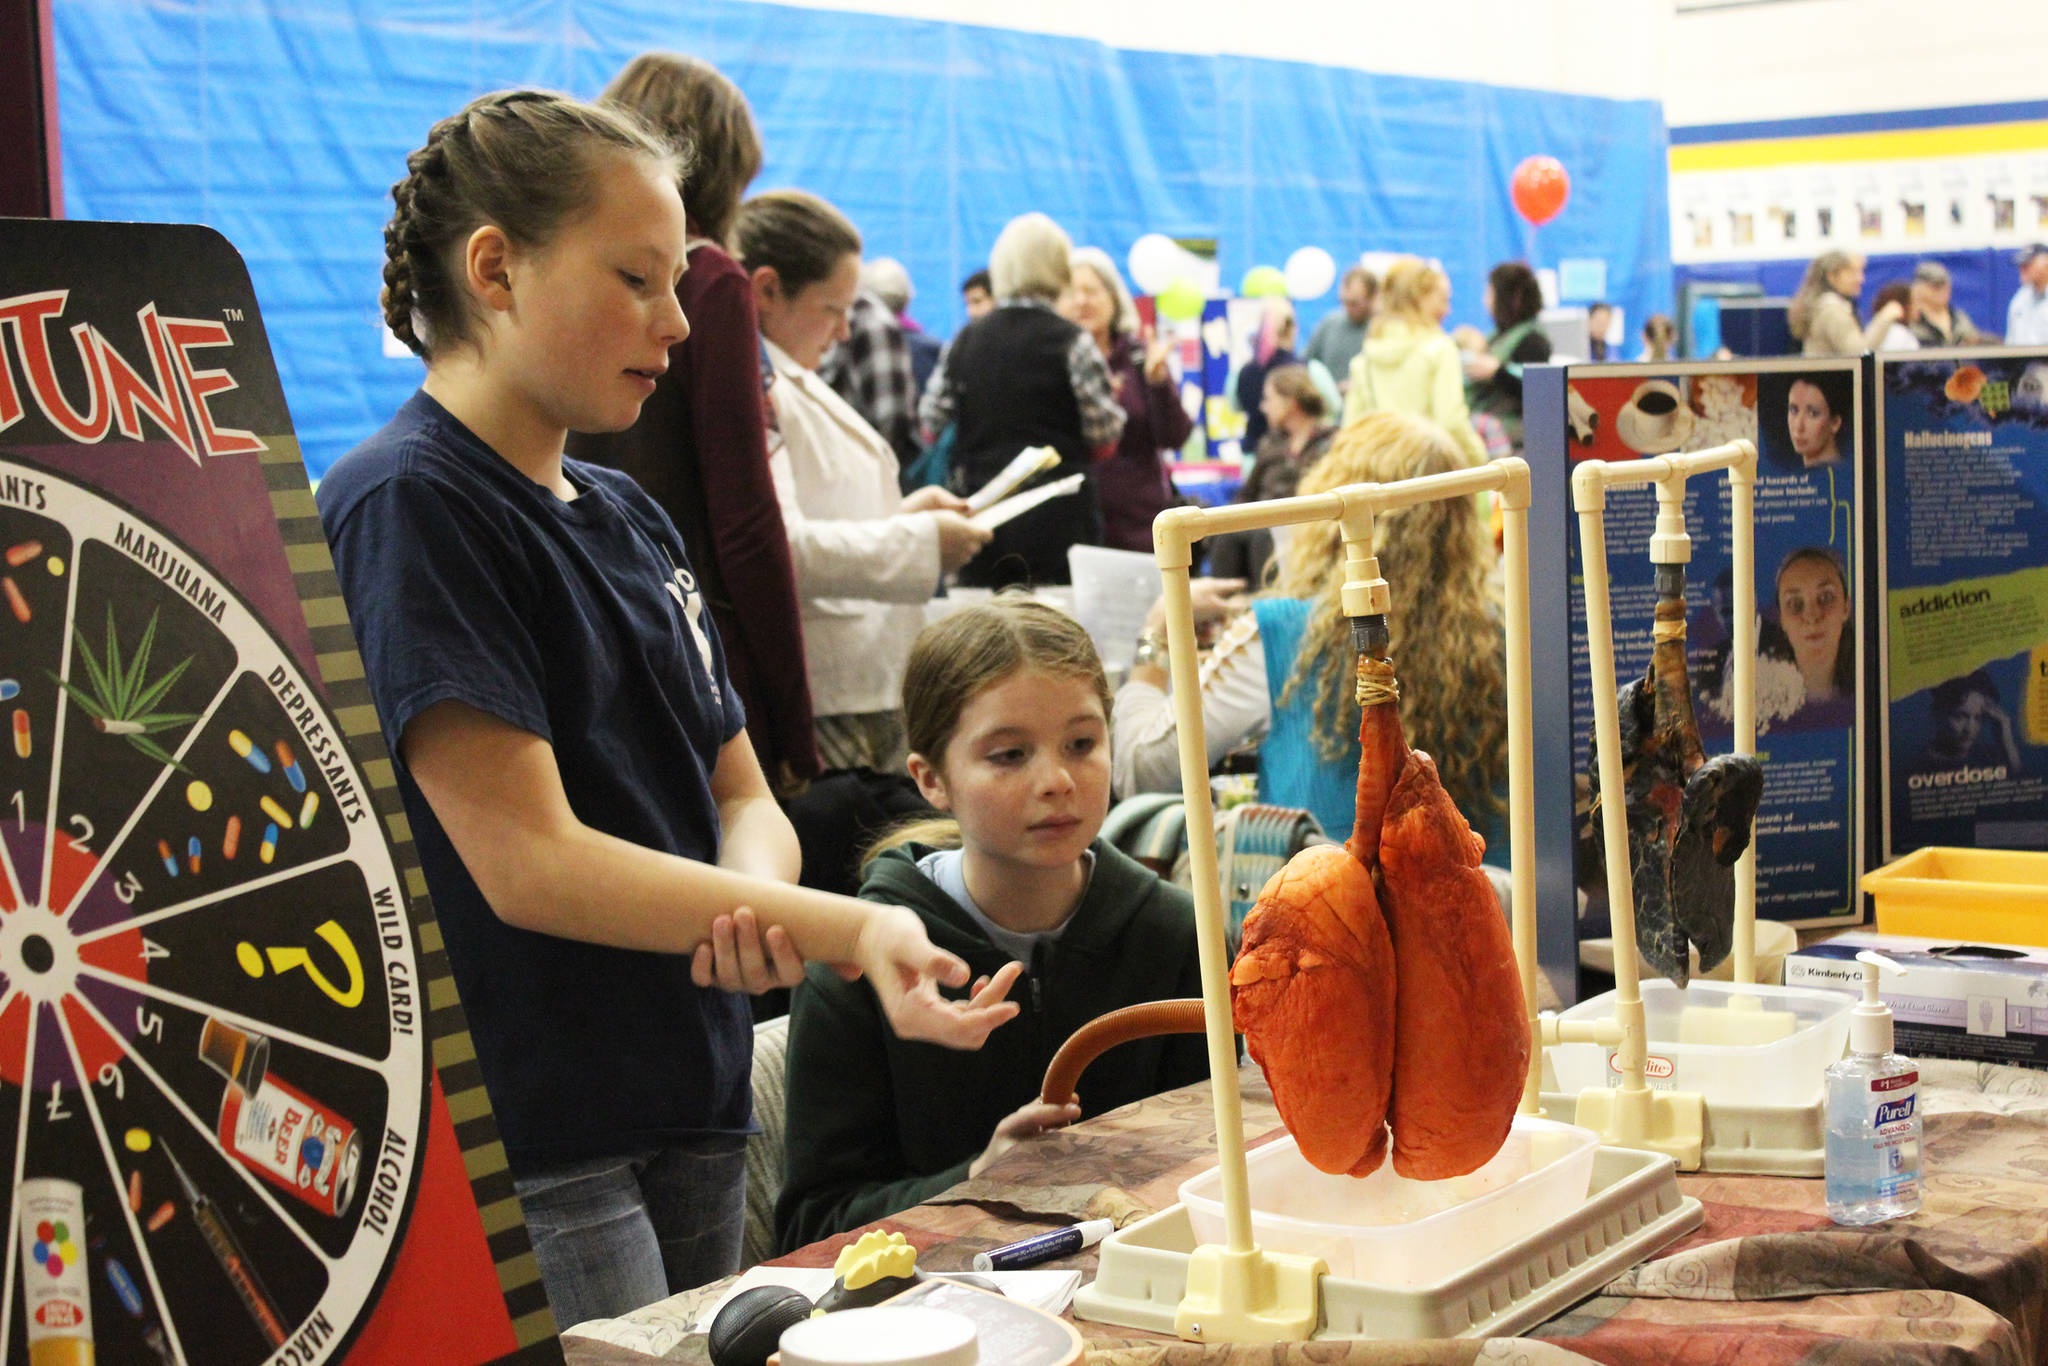 Taylor Rickard, left, and Archer Matysczak, right, educate passersby about the dangers of smoking at their booth from the Ninilchik Village Tribe at the Rotary Health Fair on Saturday, Oct. 28, 2017 at Homer High School in Homer, Alaska. (Photo by Megan Pacer/Homer News)